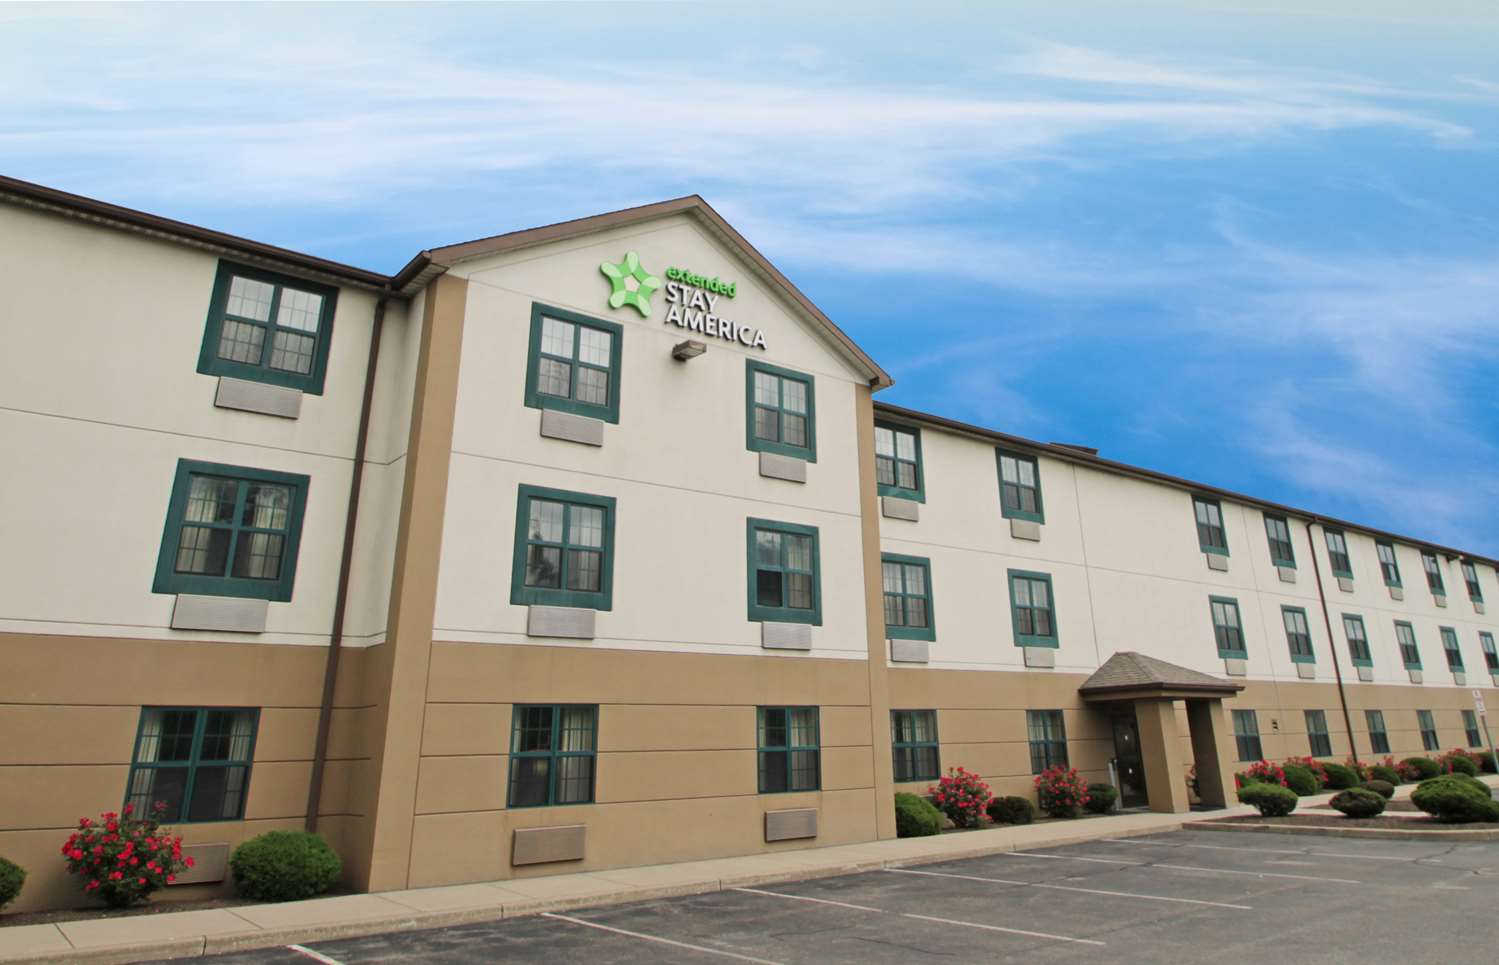 Pet Friendly Extended Stay America - Buffalo - Amherst in Amherst, New York